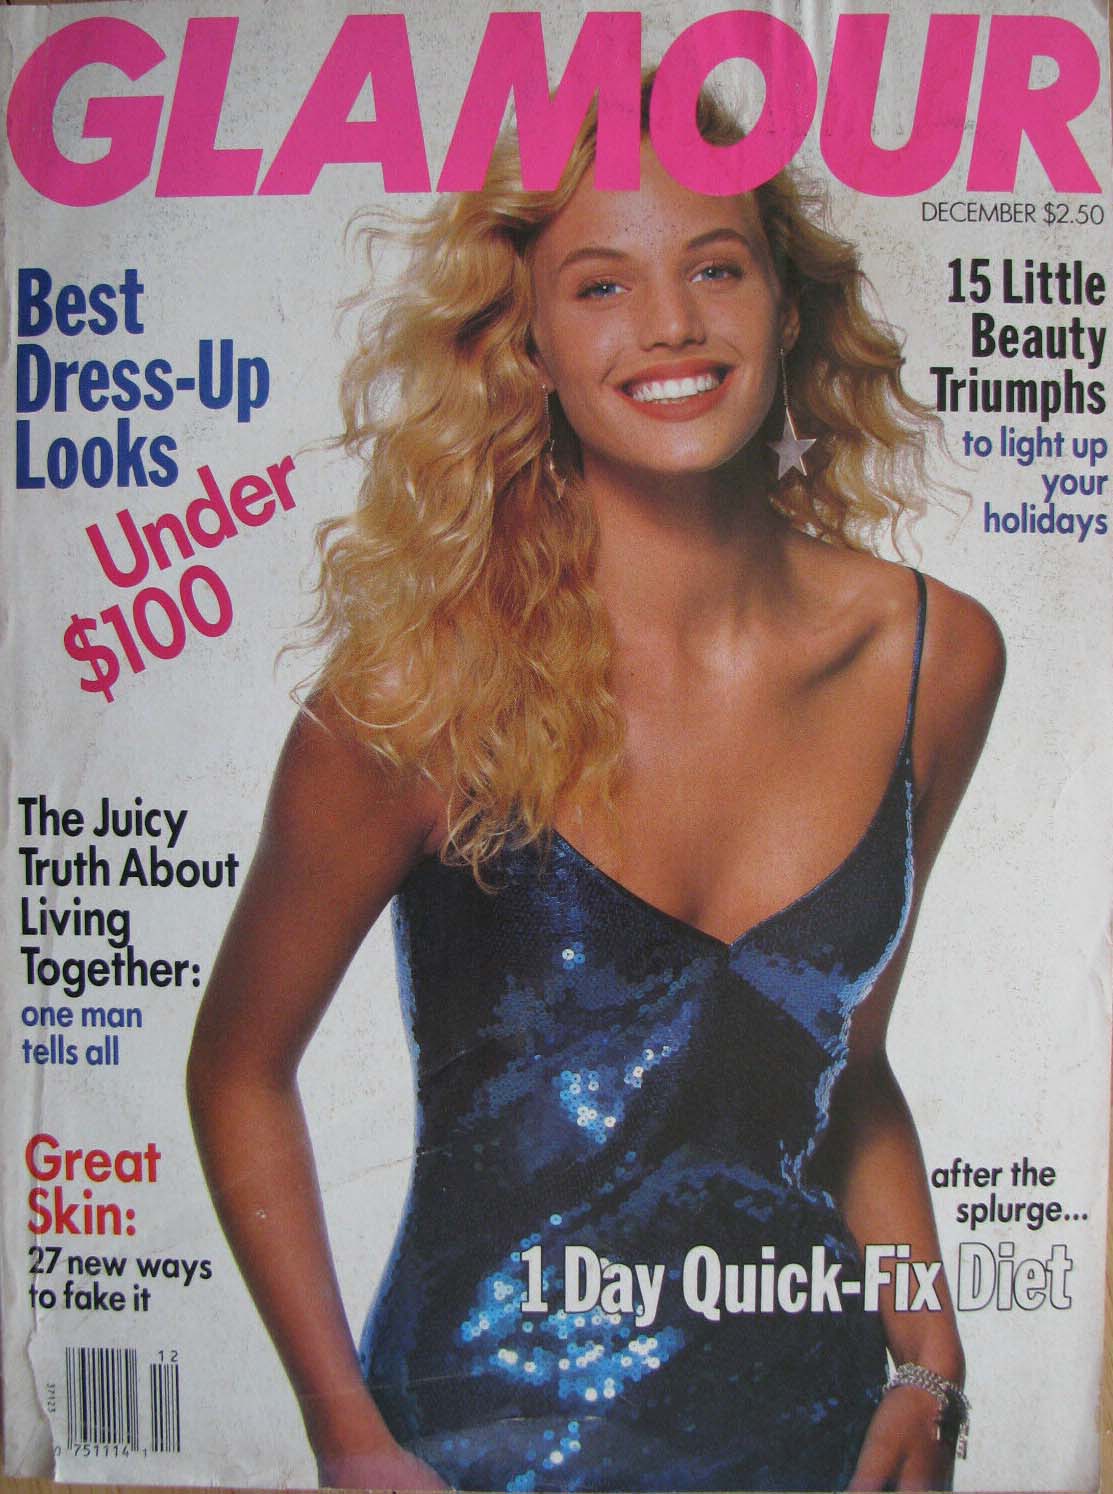 Glamour December 1989 magazine back issue Glamour magizine back copy Glamour December 1989 Womens Magazine Back Issue Published by Conde Nast Publications. Best Dress - Up Looks Under $100.